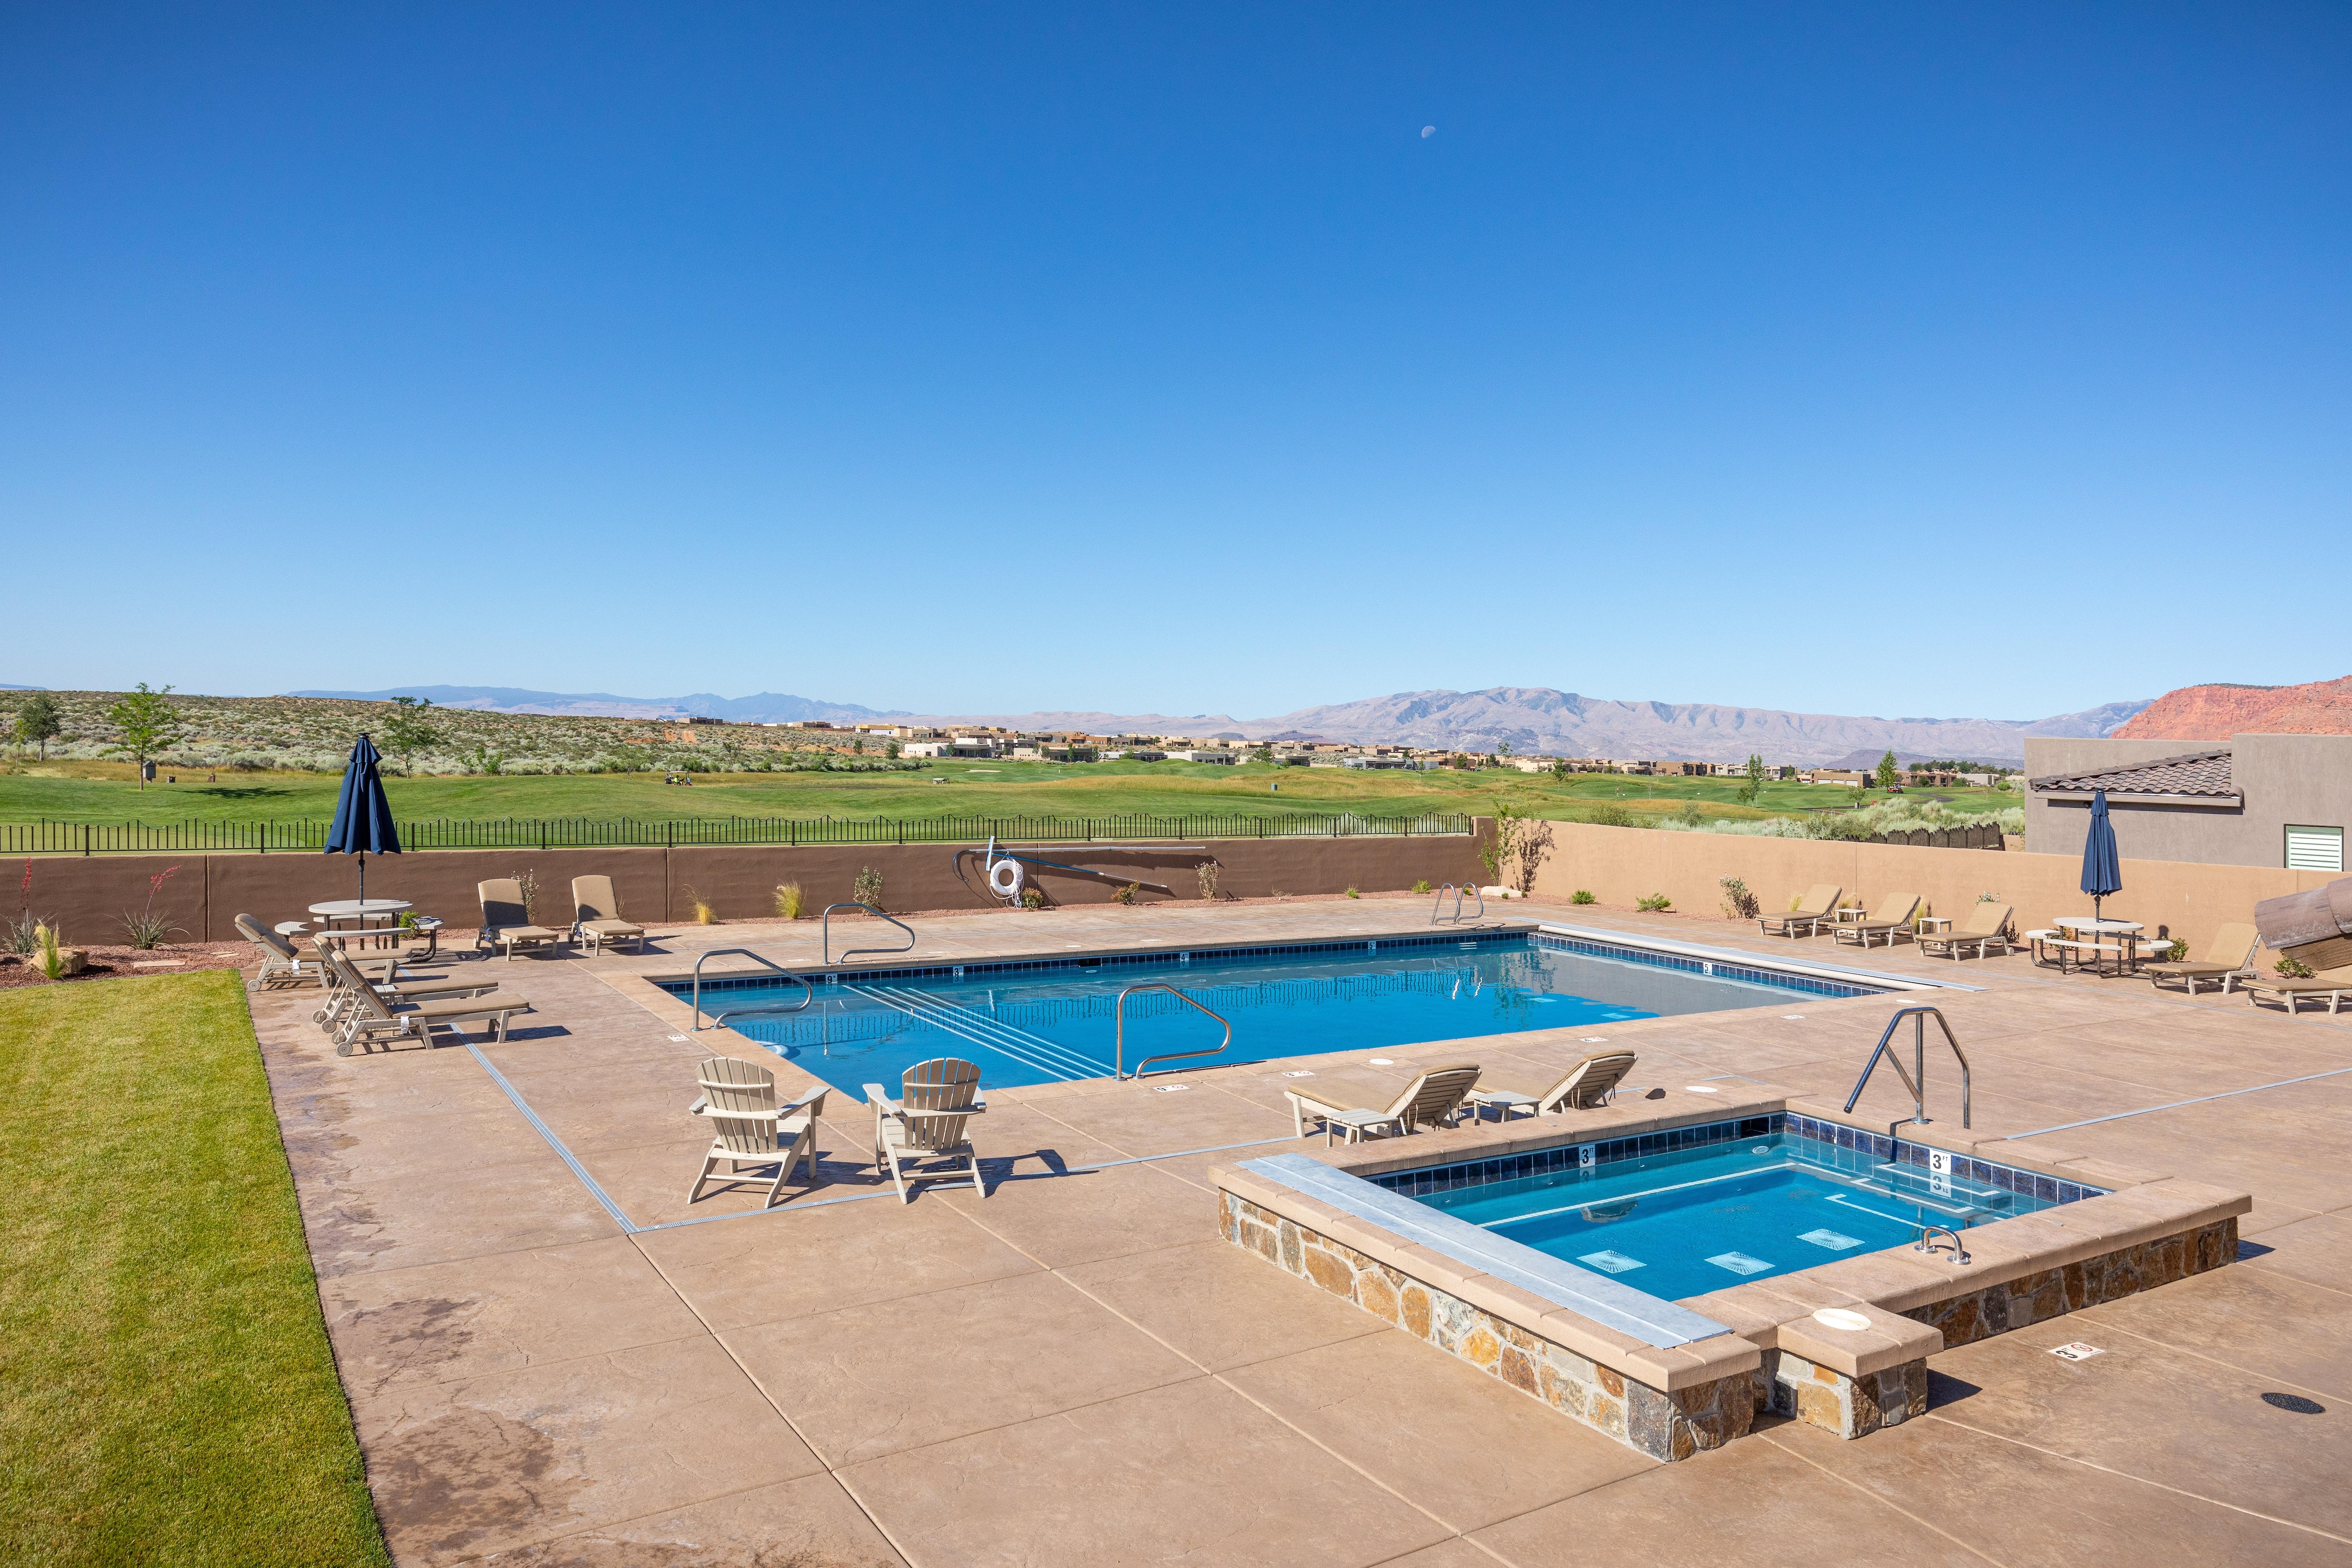 The Fairways At The Ledges amenities include a heated pool, hot tub, fitness center, two pickleball courts, horseshoes, fire pit, kitchen area, and restrooms. **Please note the pool is closed from November thru February**